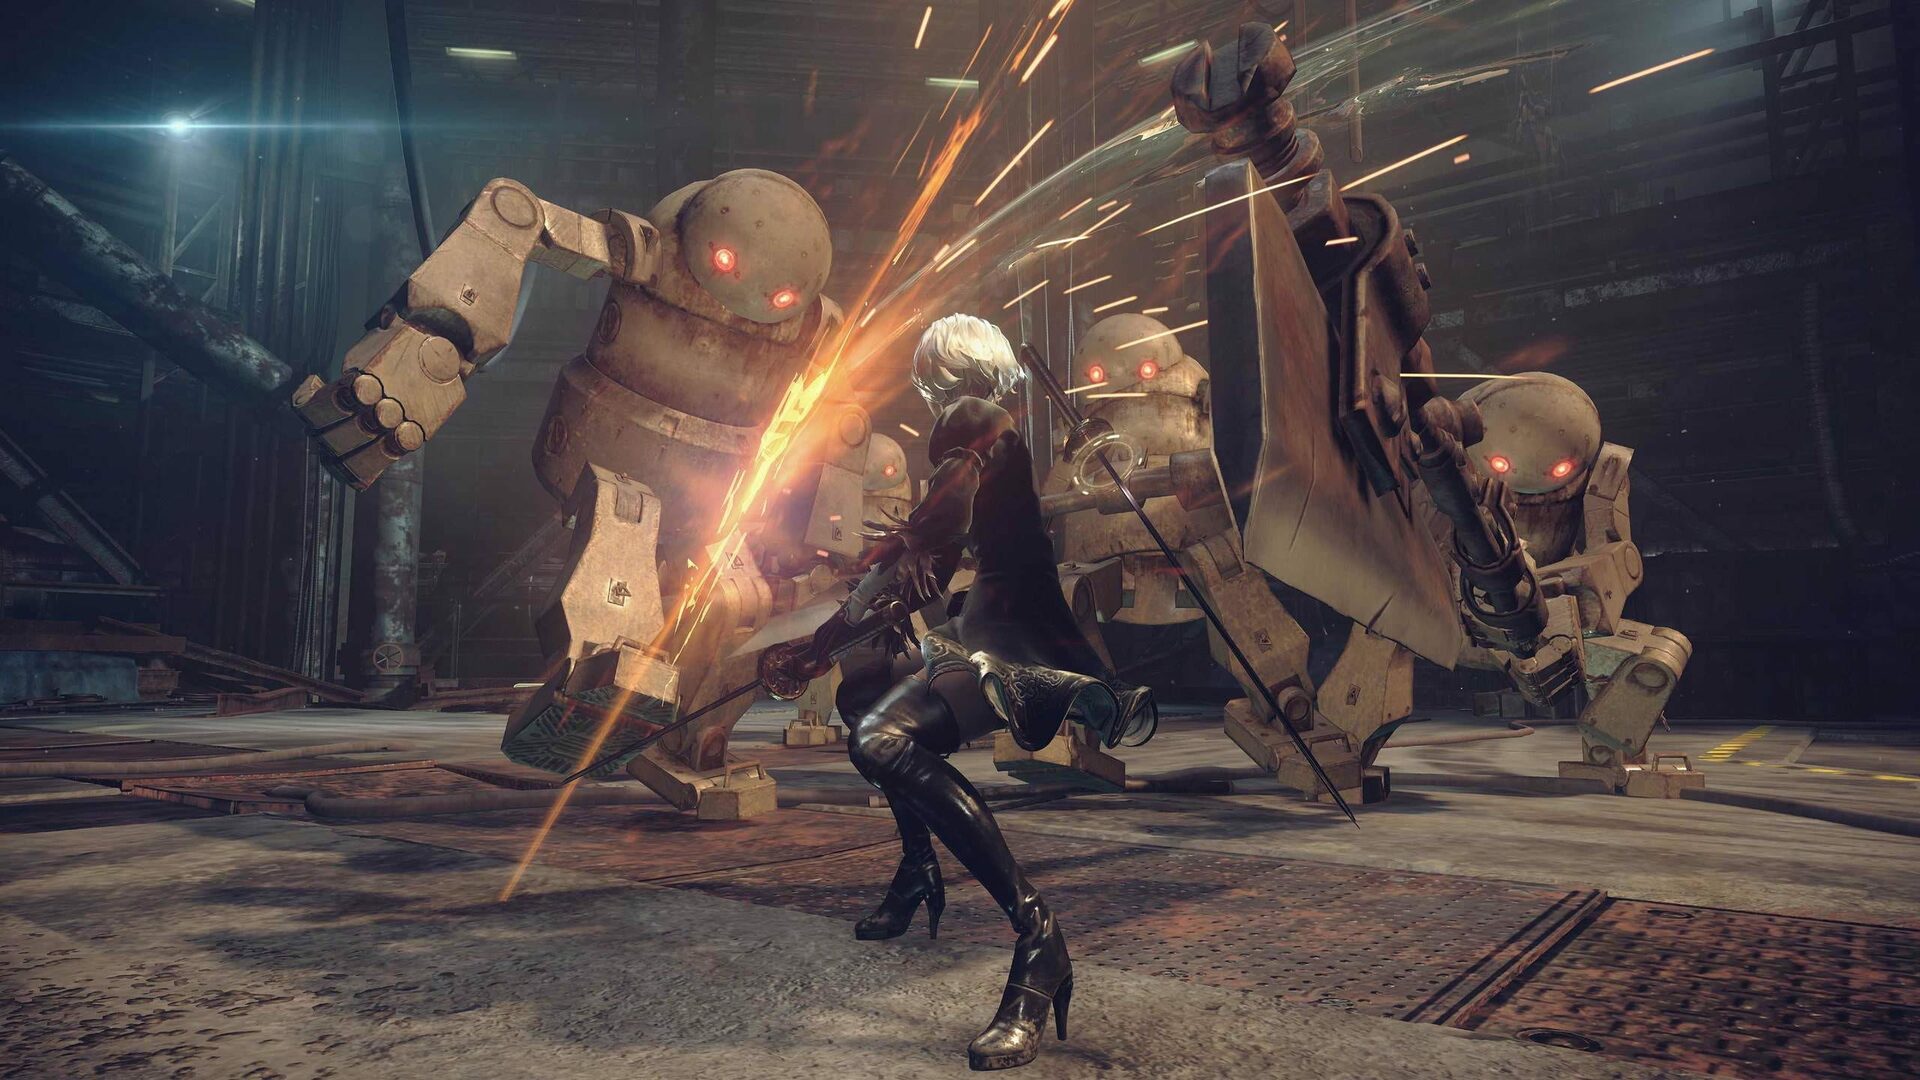 NieR: Automata Steam Key for PC - Buy now